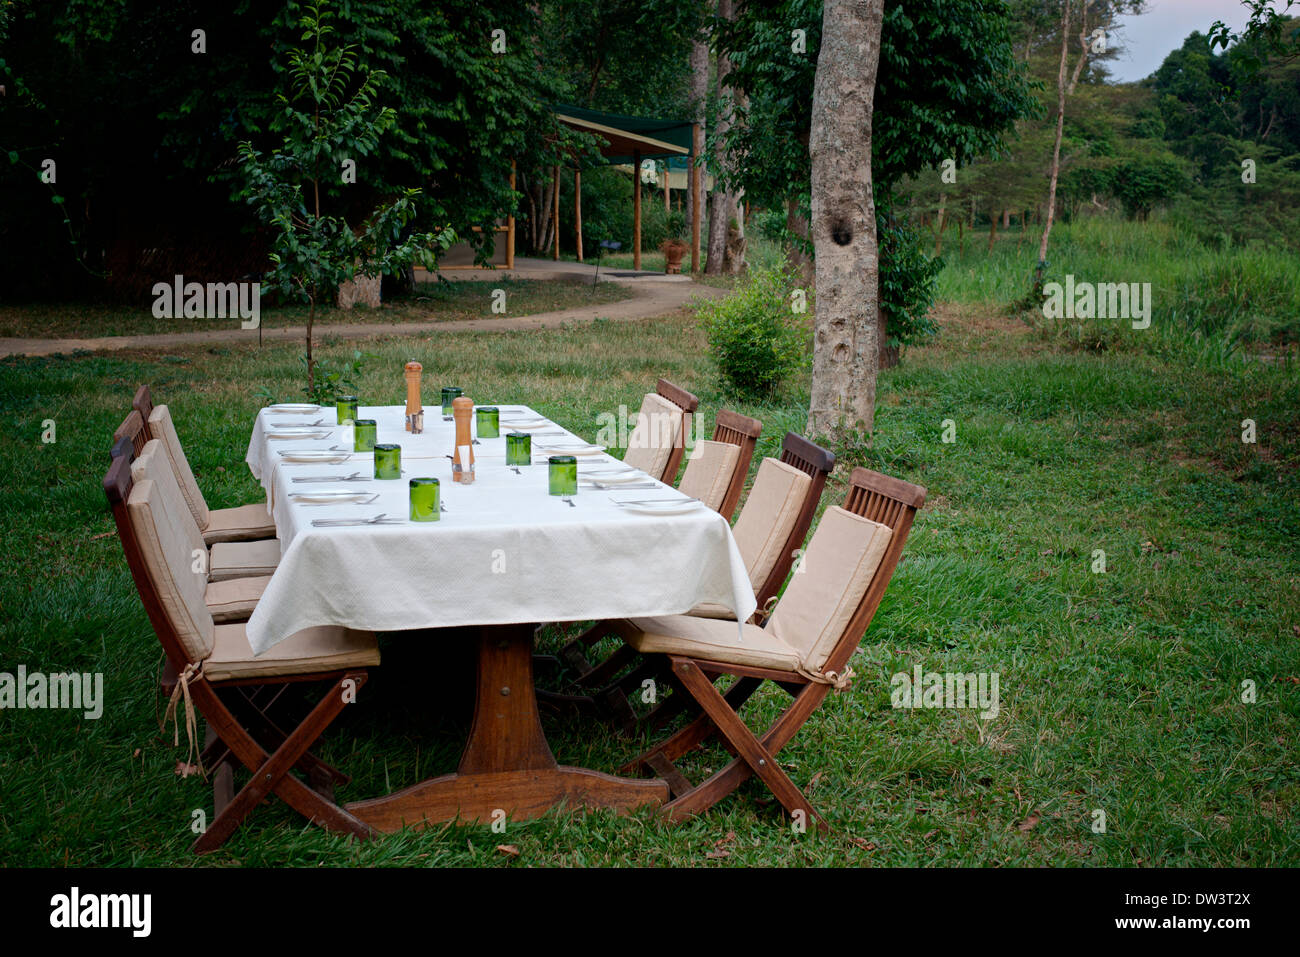 Al Fresco Dining - Seating for 8 eight outdoors in the evening, Uganda. Empty chairs. A grassy area. Stock Photo